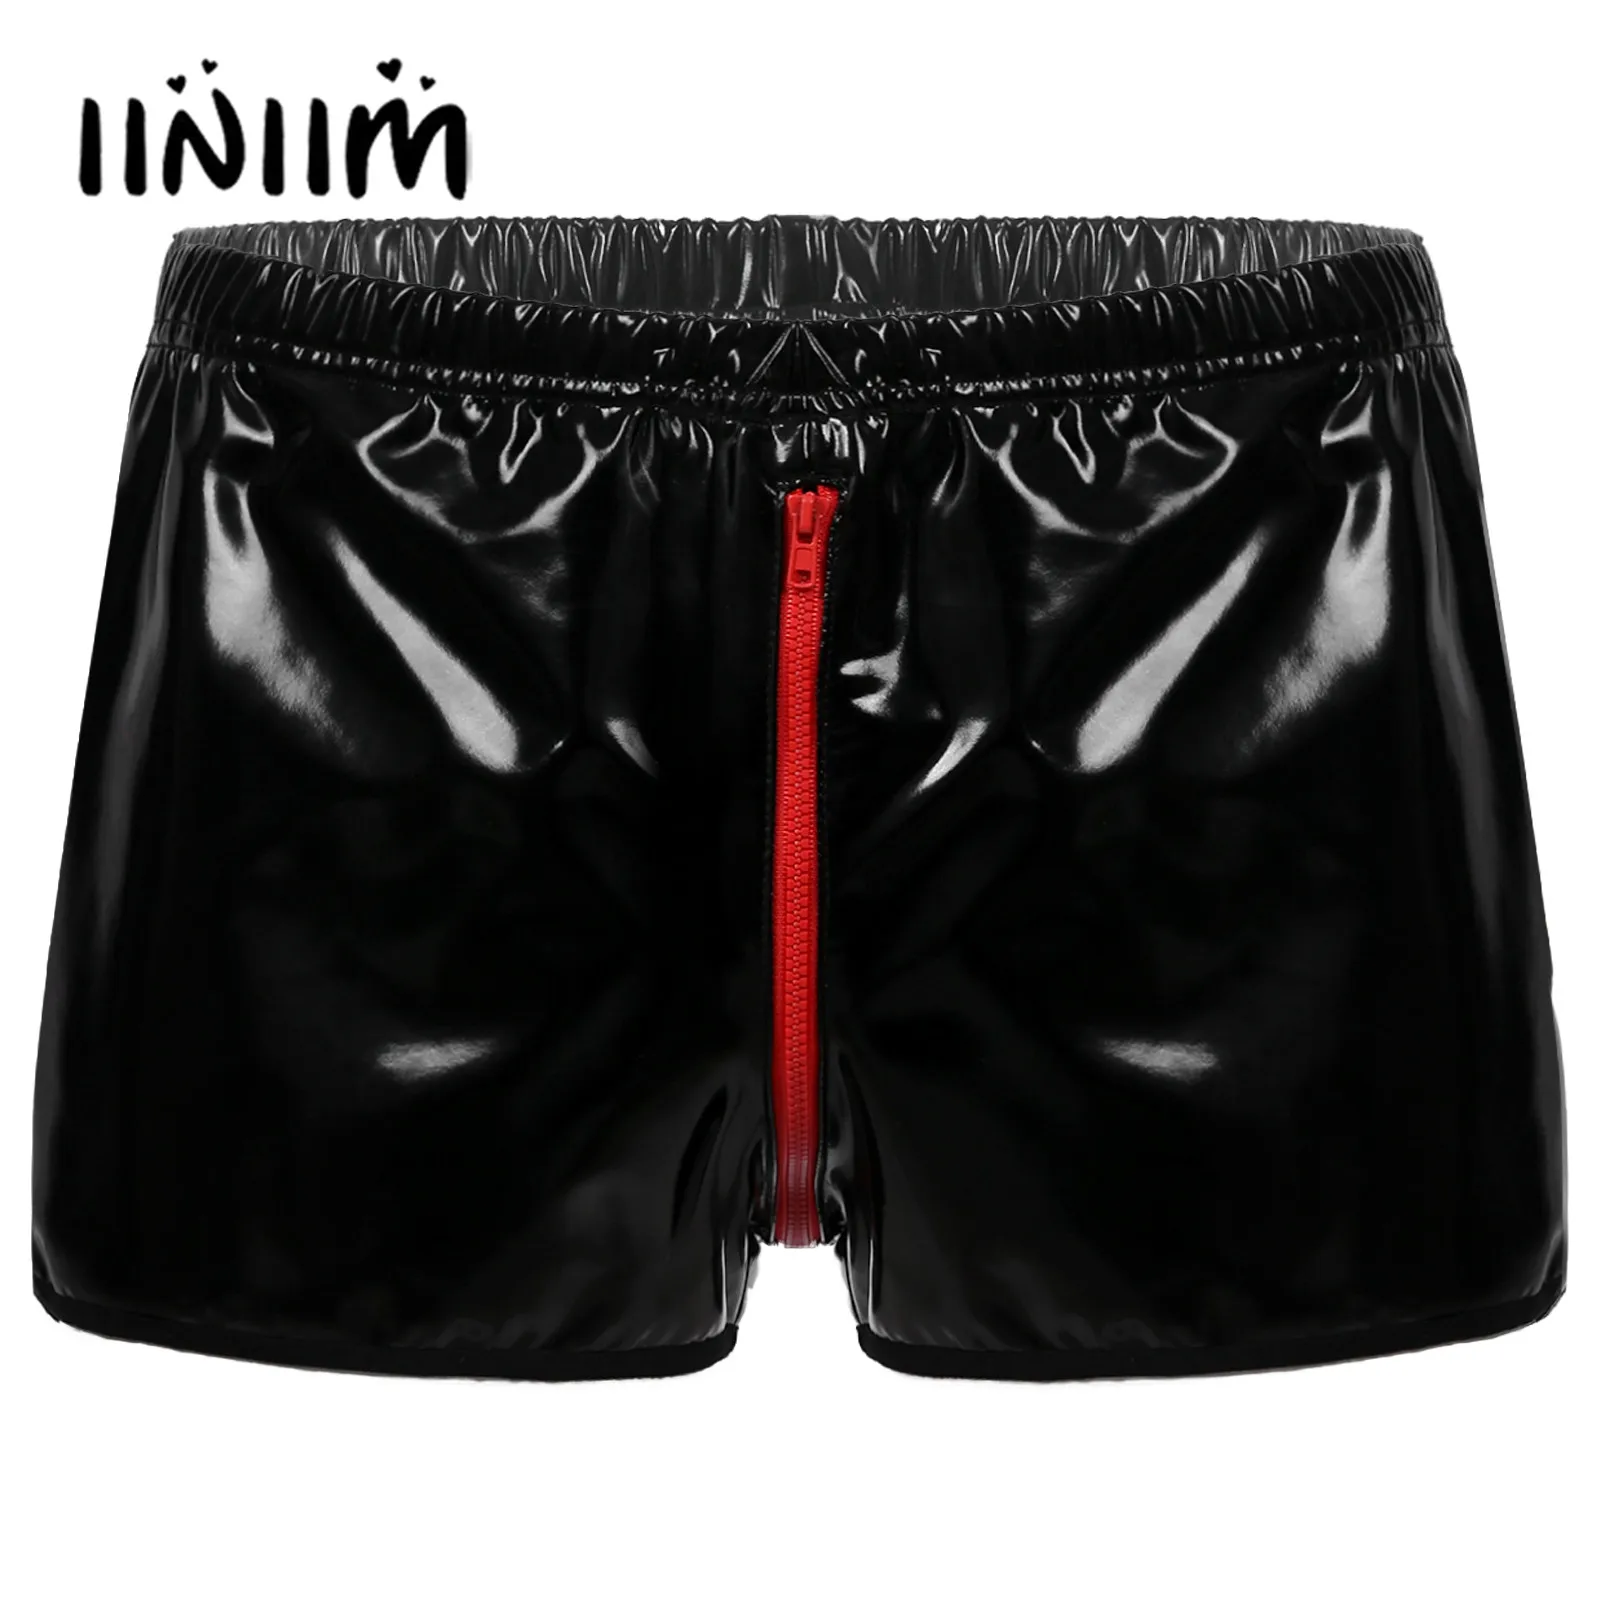 

Mens Male Wet Look Patent Leather Rave Shorts Clubwear Elastic Waistband Zipper Crotch Short Pants for Nightclub Pole Dancing